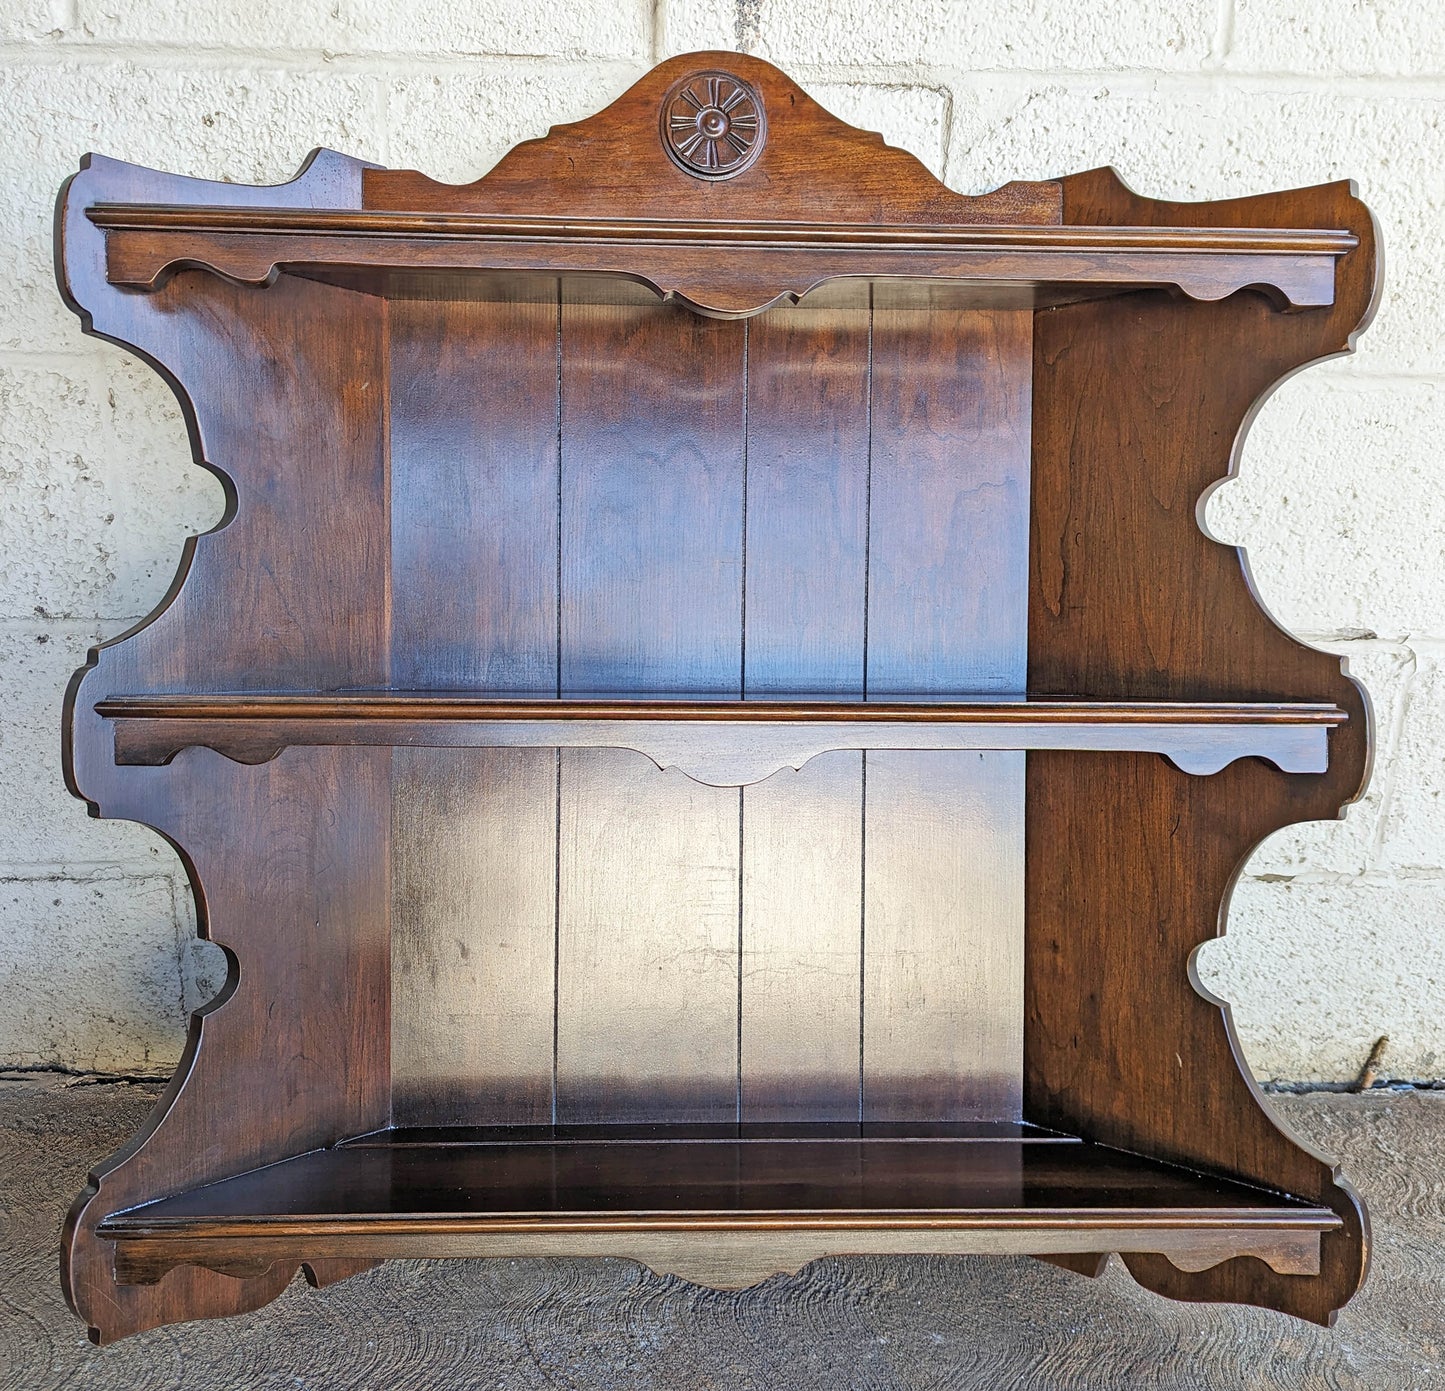 32"x34" Vintage Antique Old "Ethan Allen" SOLID Cherry Wood Wooden Wall Shelf Shelves Shelving China Curio